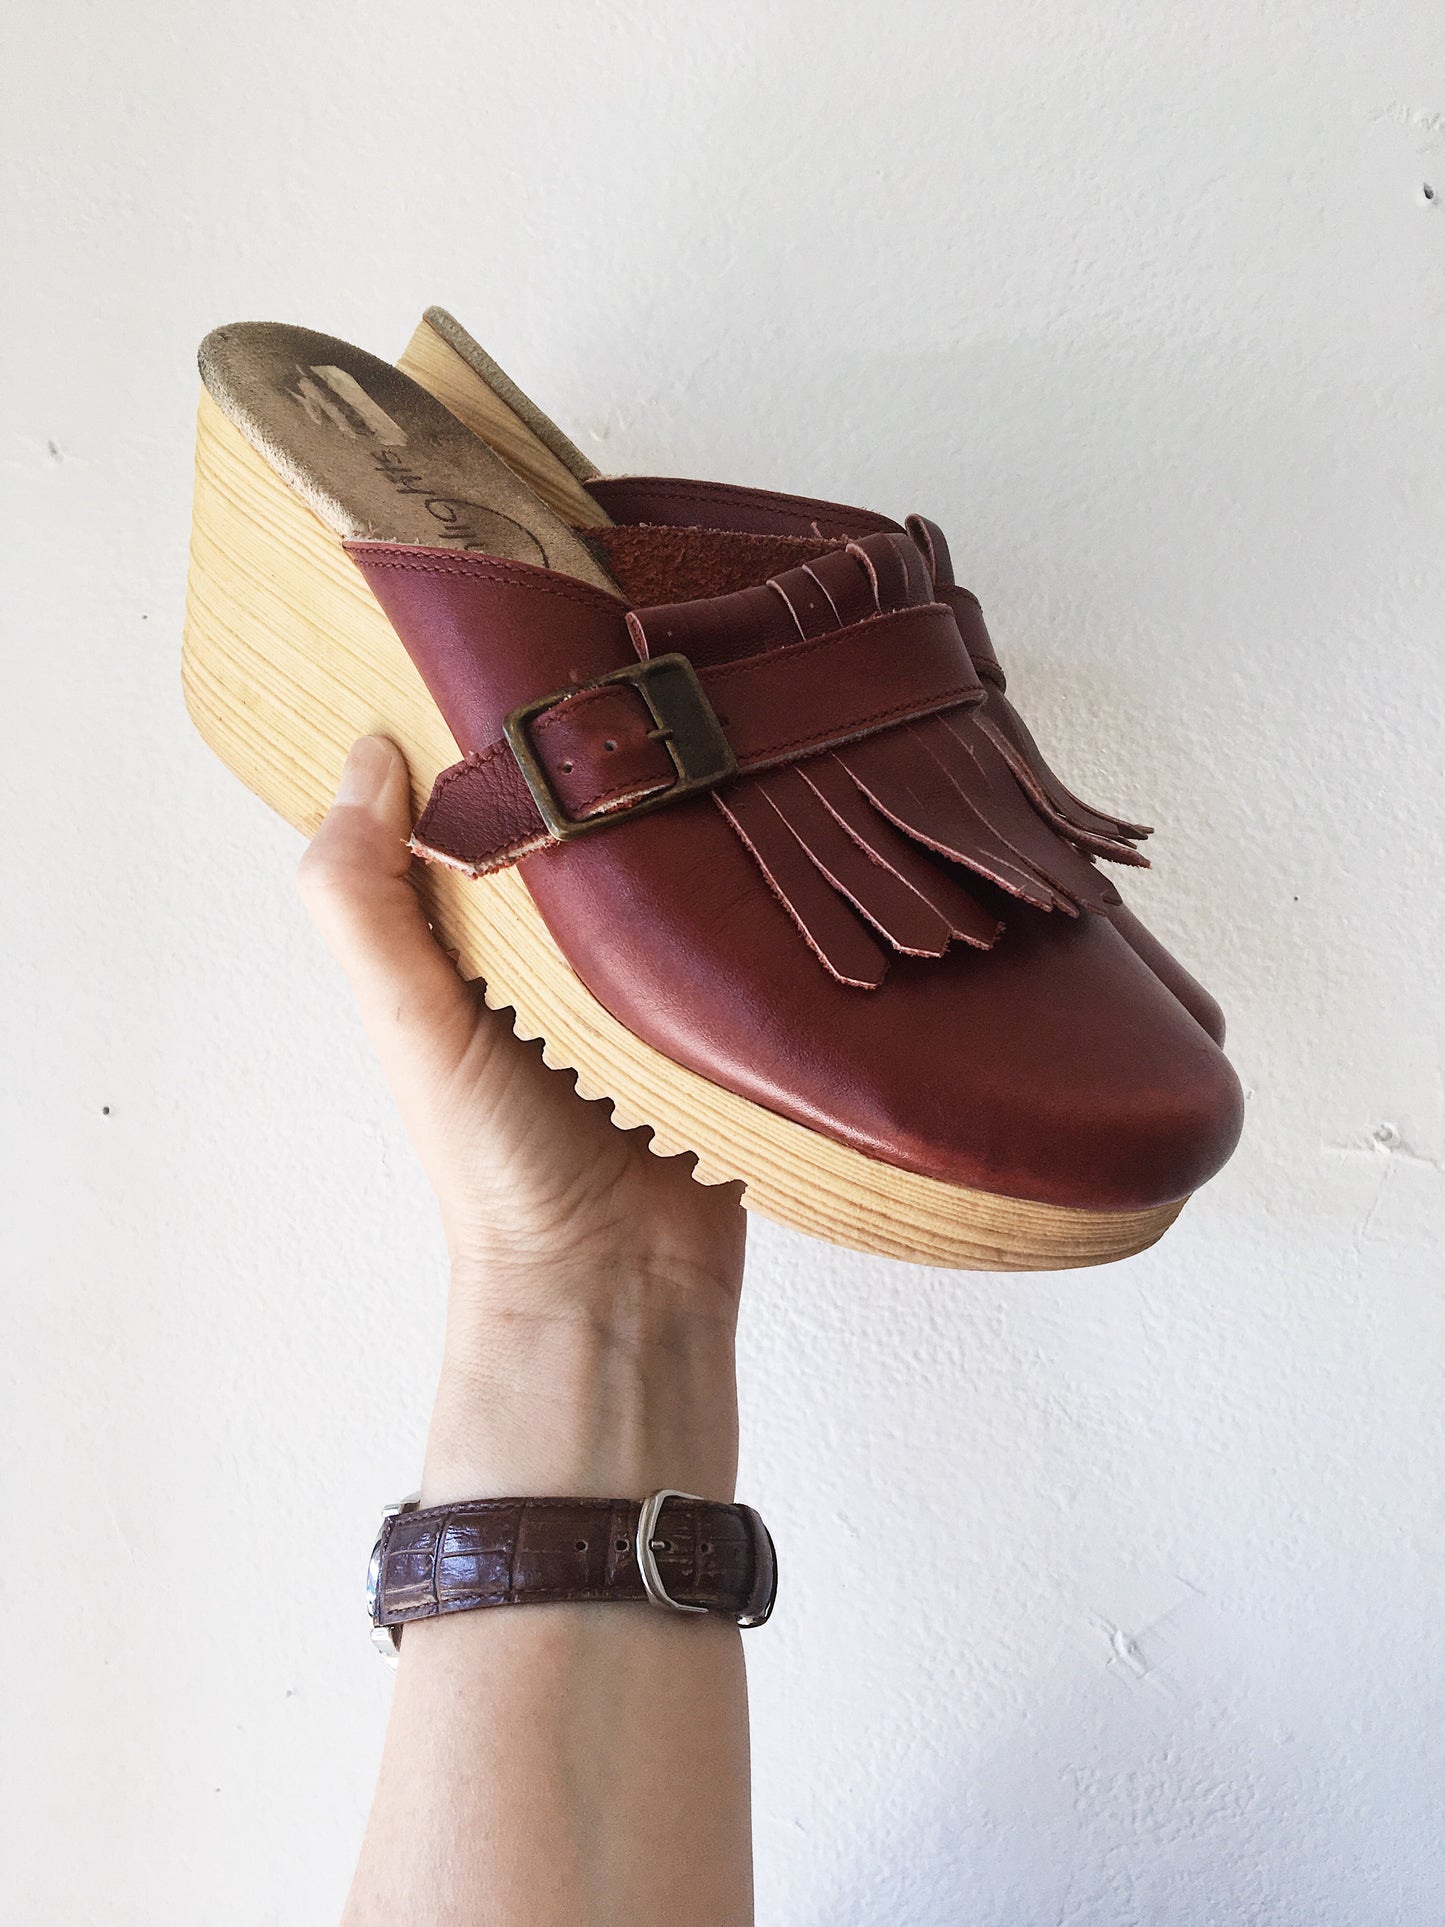 Vintage Leather Wedge Clogs